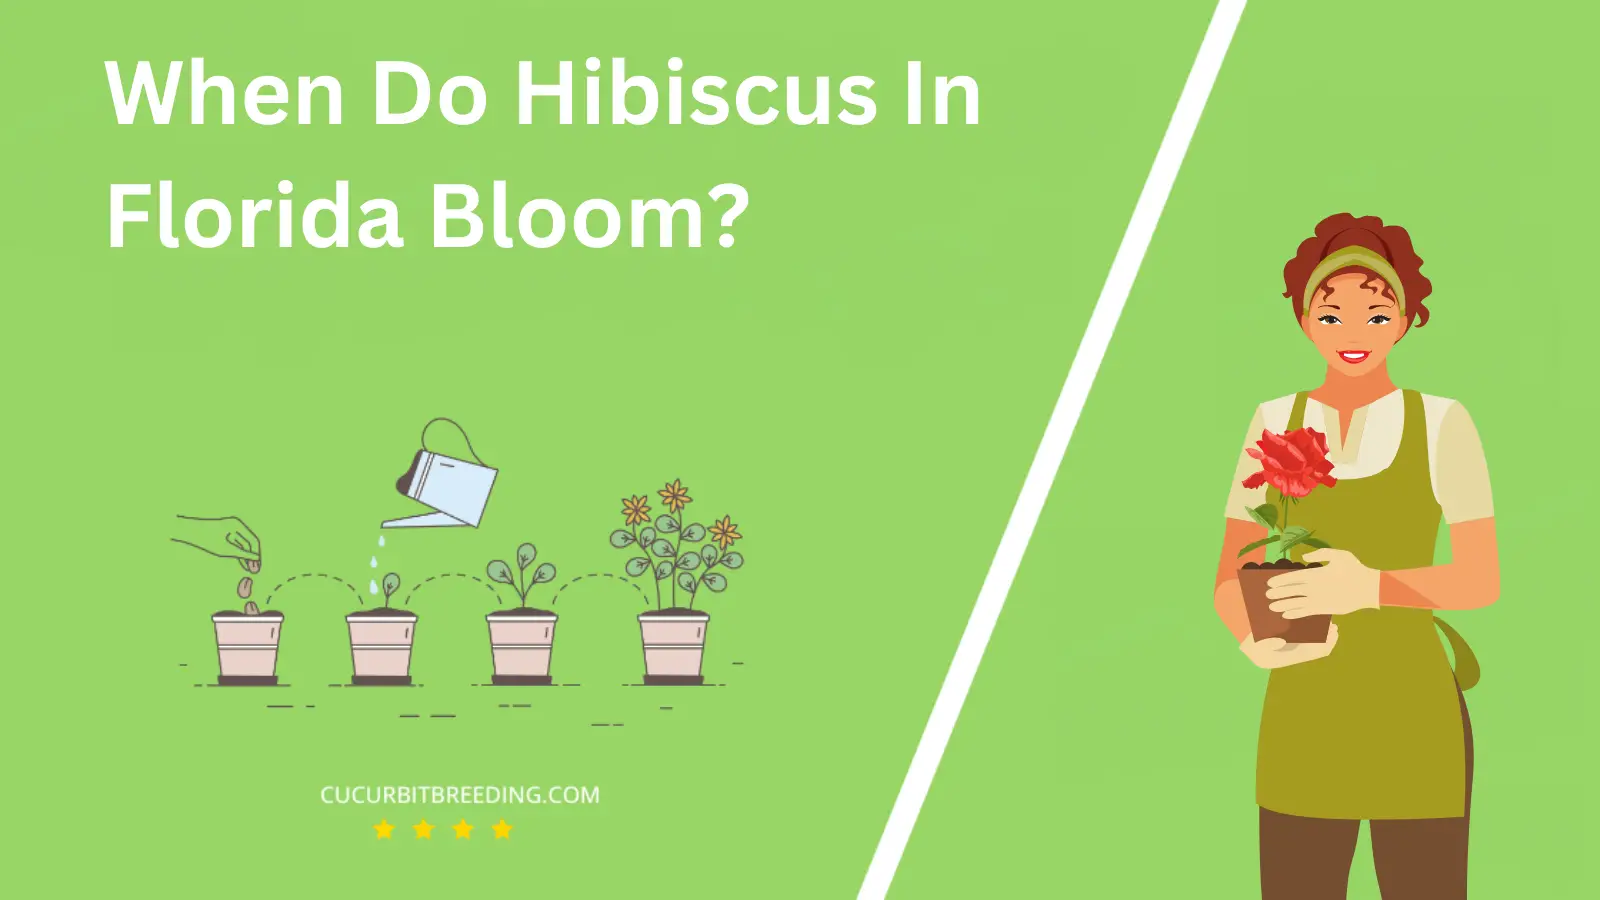 When Do Hibiscus In Florida Bloom?